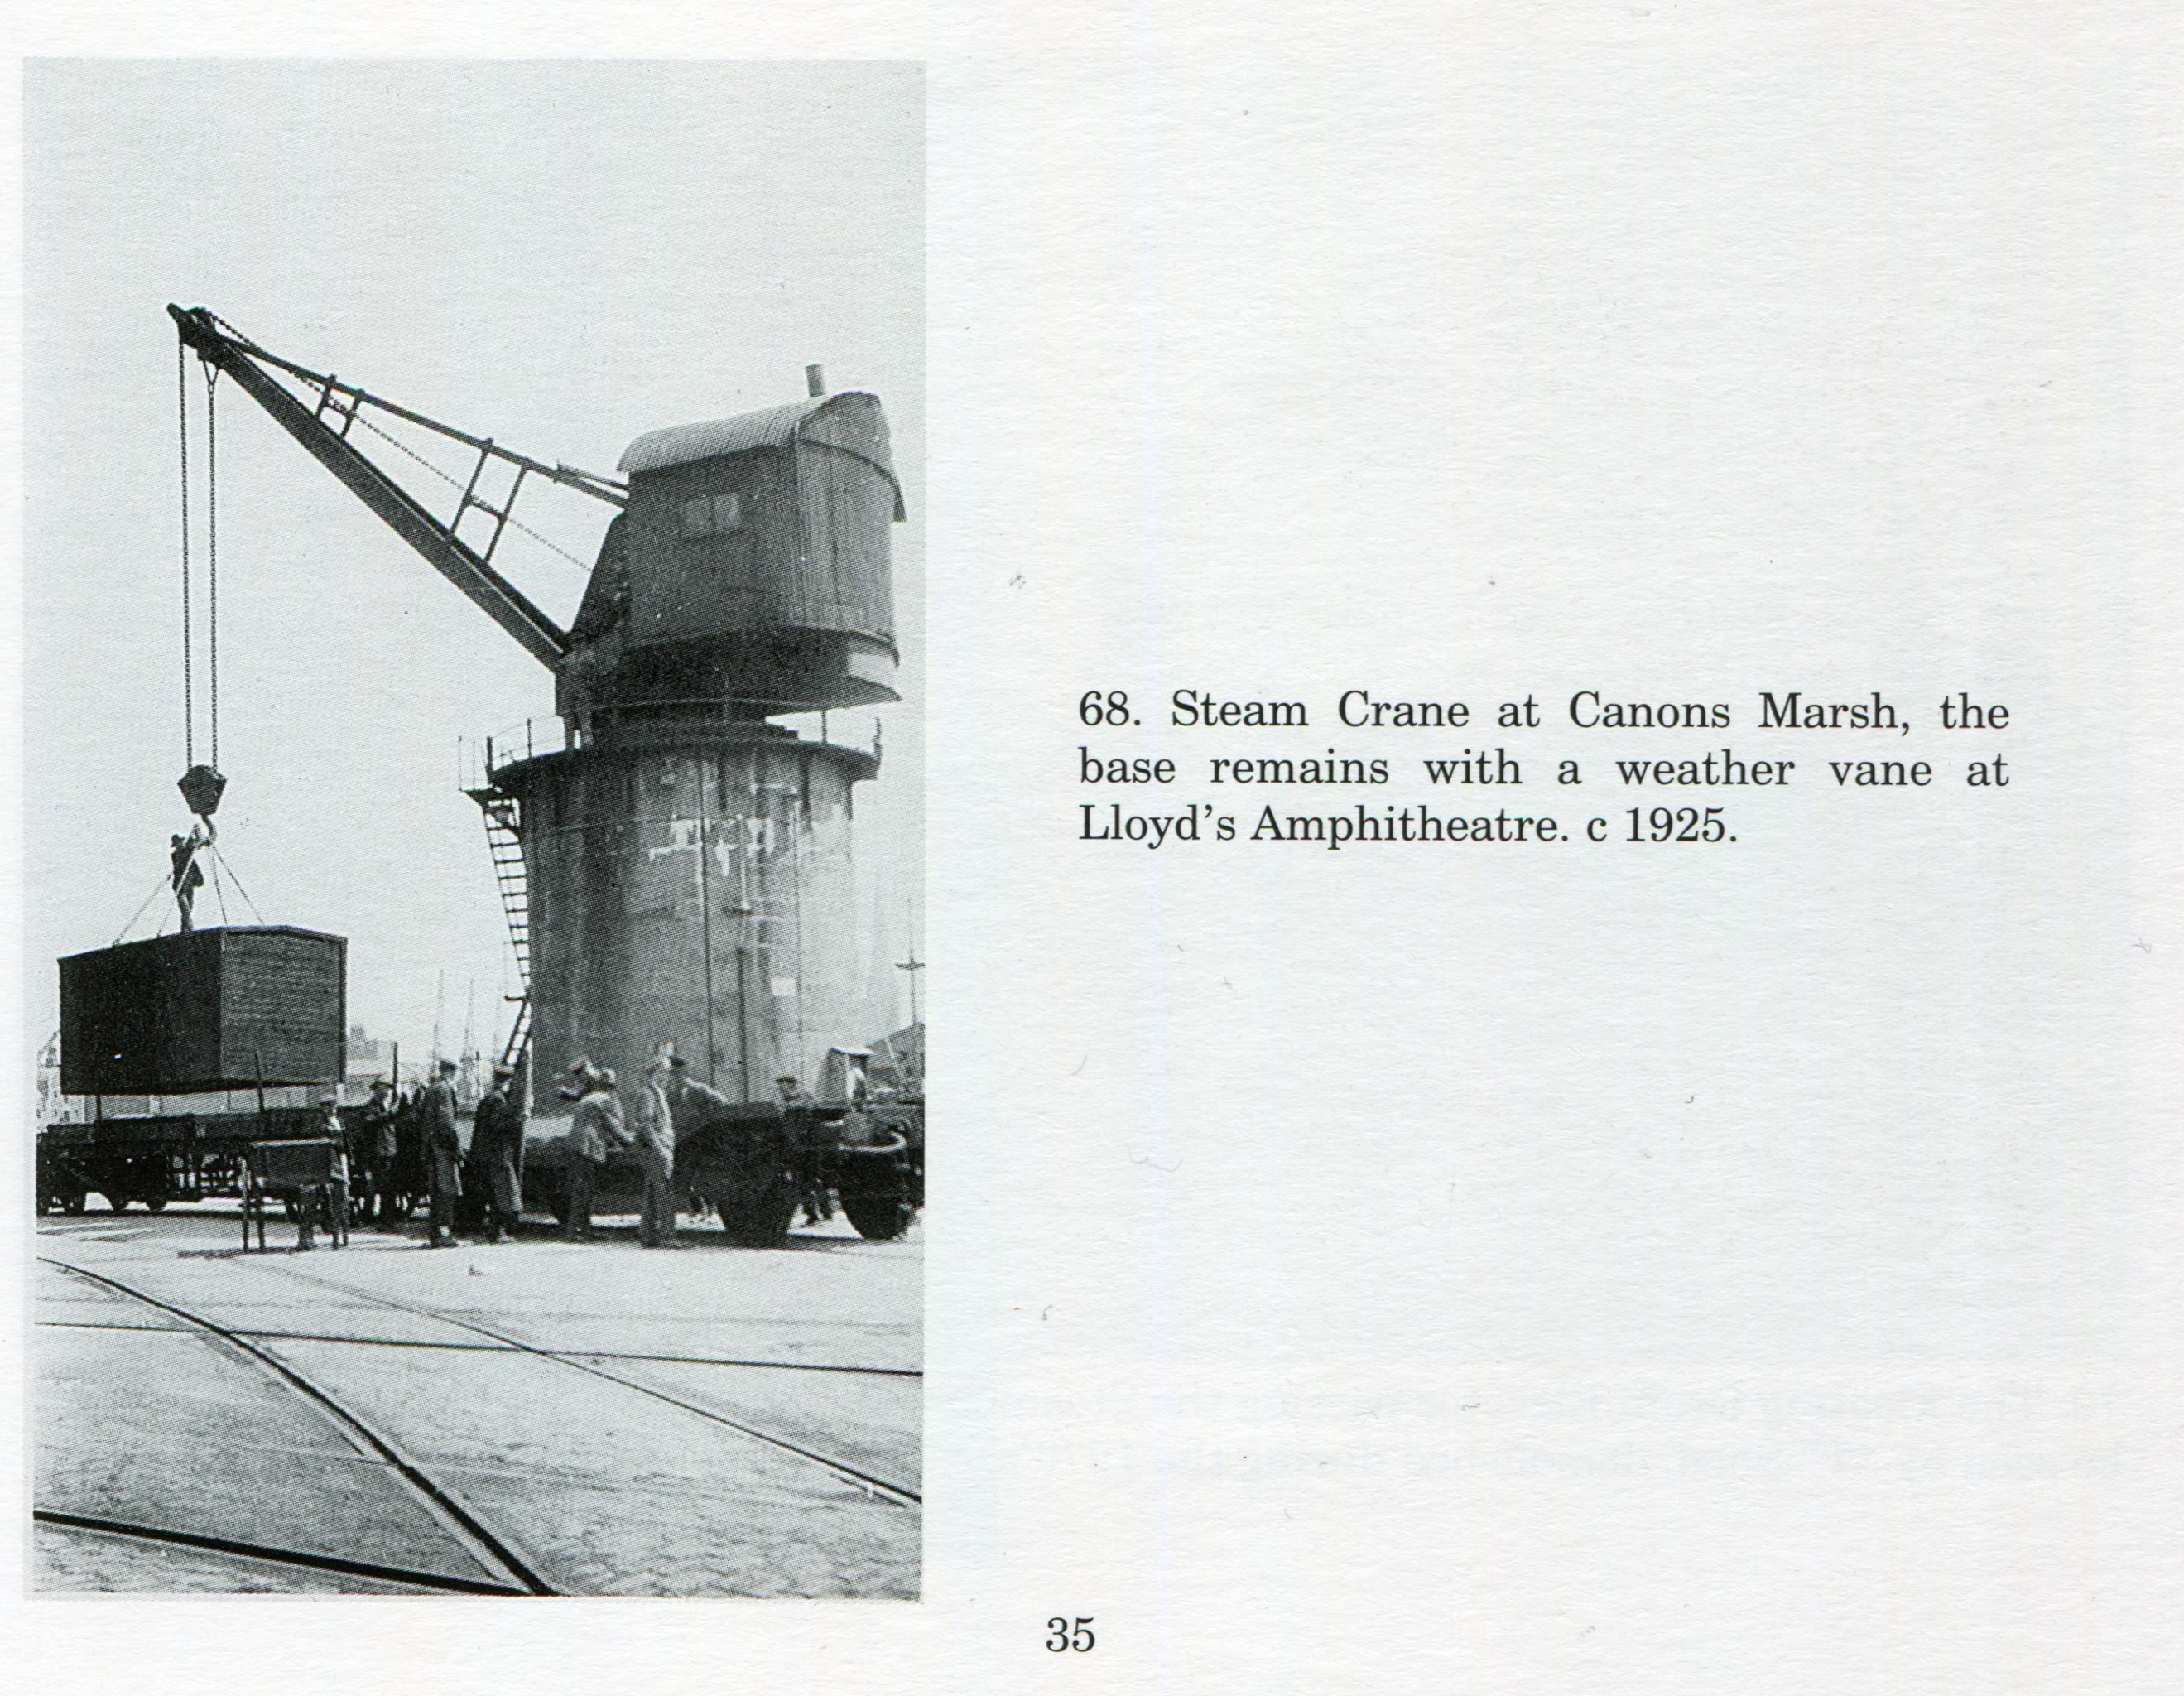 Canon's Marsh Steam Crane c. 1925
Picture from Bygone Bristol: Hotwells and the City Docks, by Brian Lewis, and Janet and Derek Fisher.
